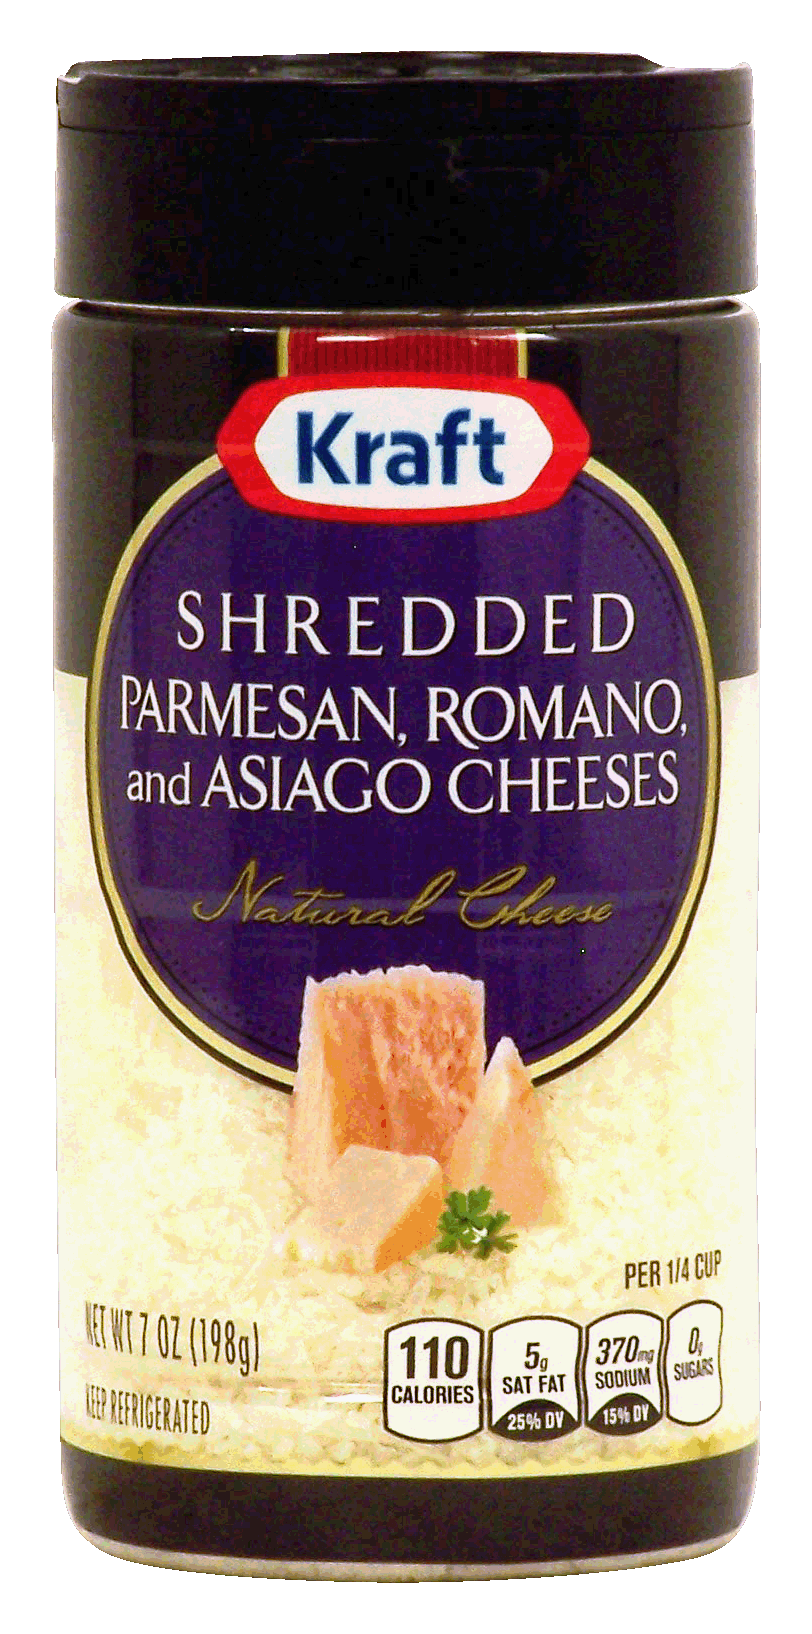 Kraft Cheese Shredded Parmesan Romano & Asiago Full-Size Picture